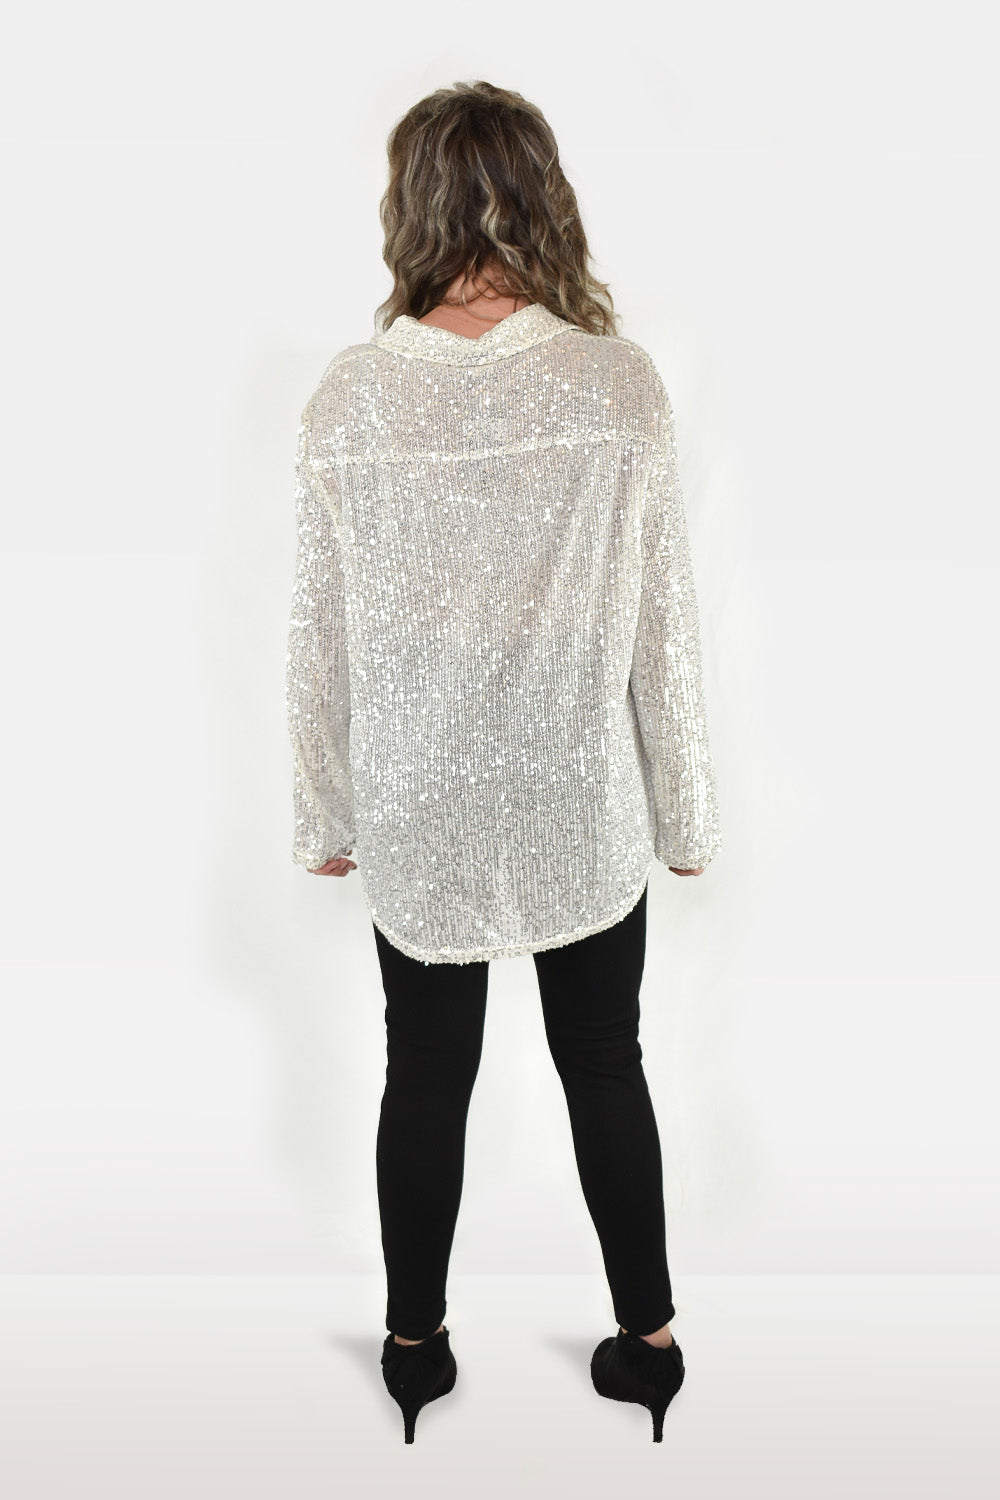 Sequin Adorned Button Down Blouse by POL Clothing